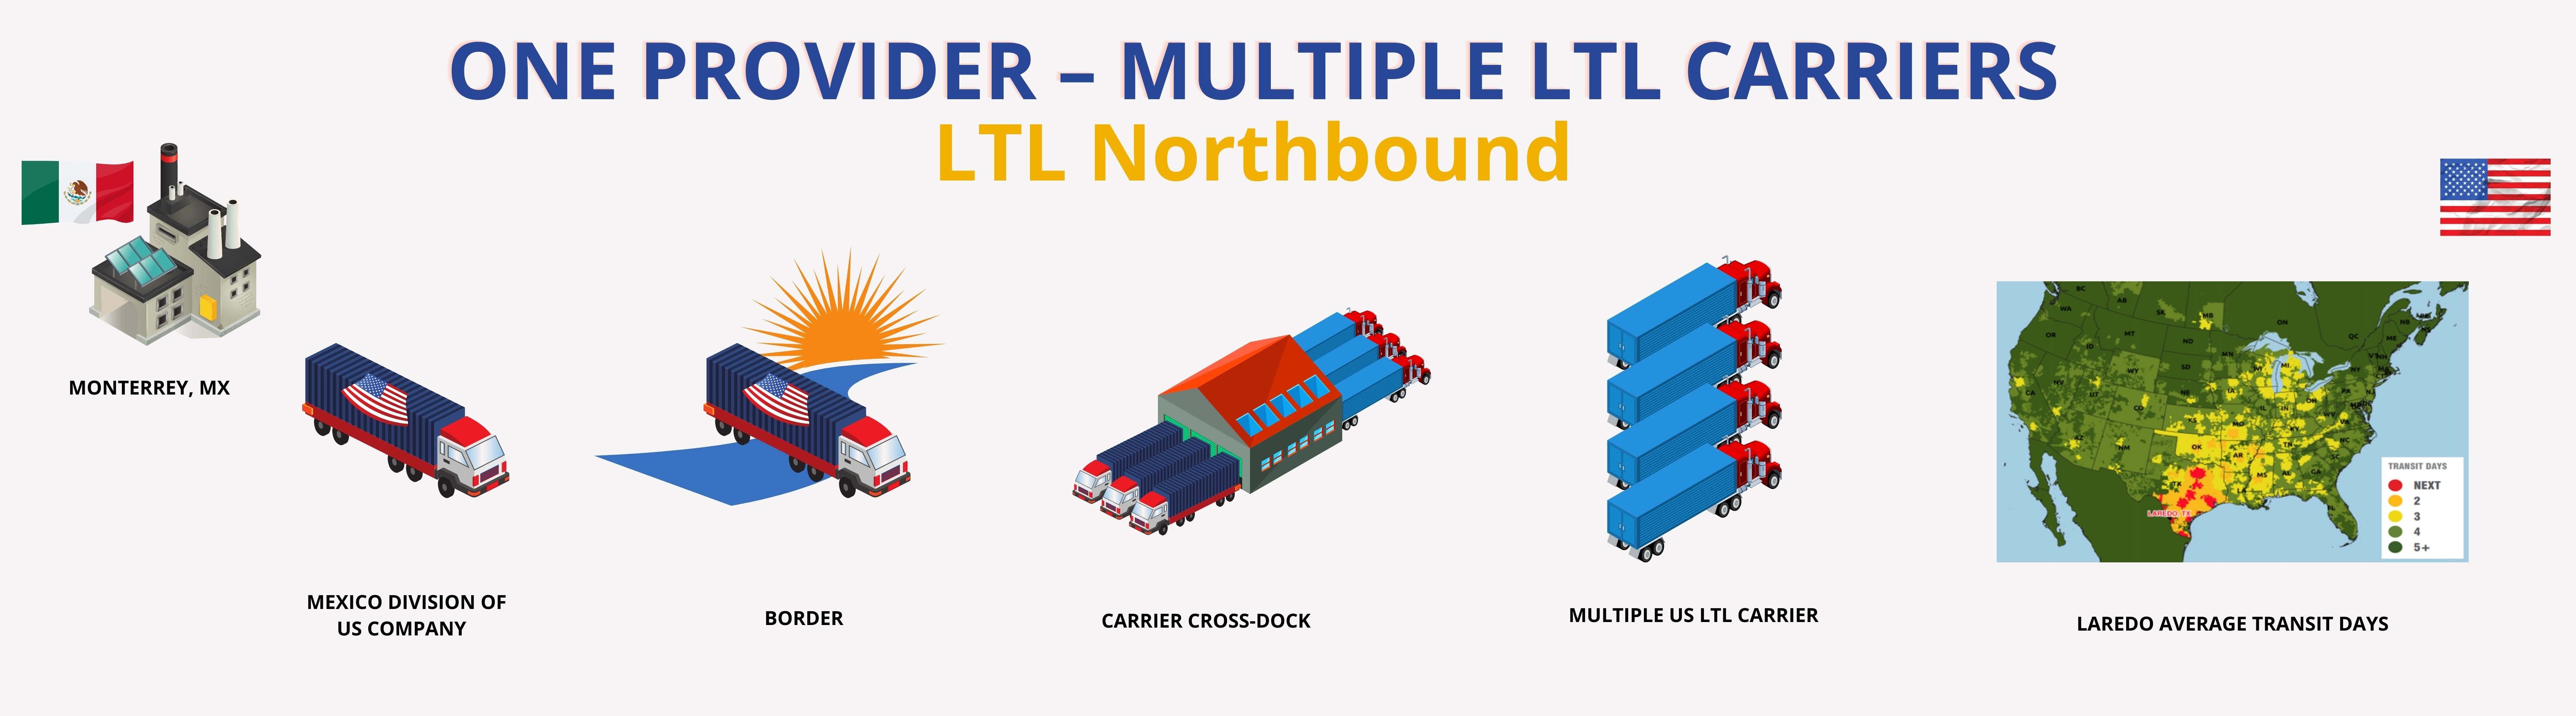 Hufcor One Provider – Multiple LTL Carriers (1)